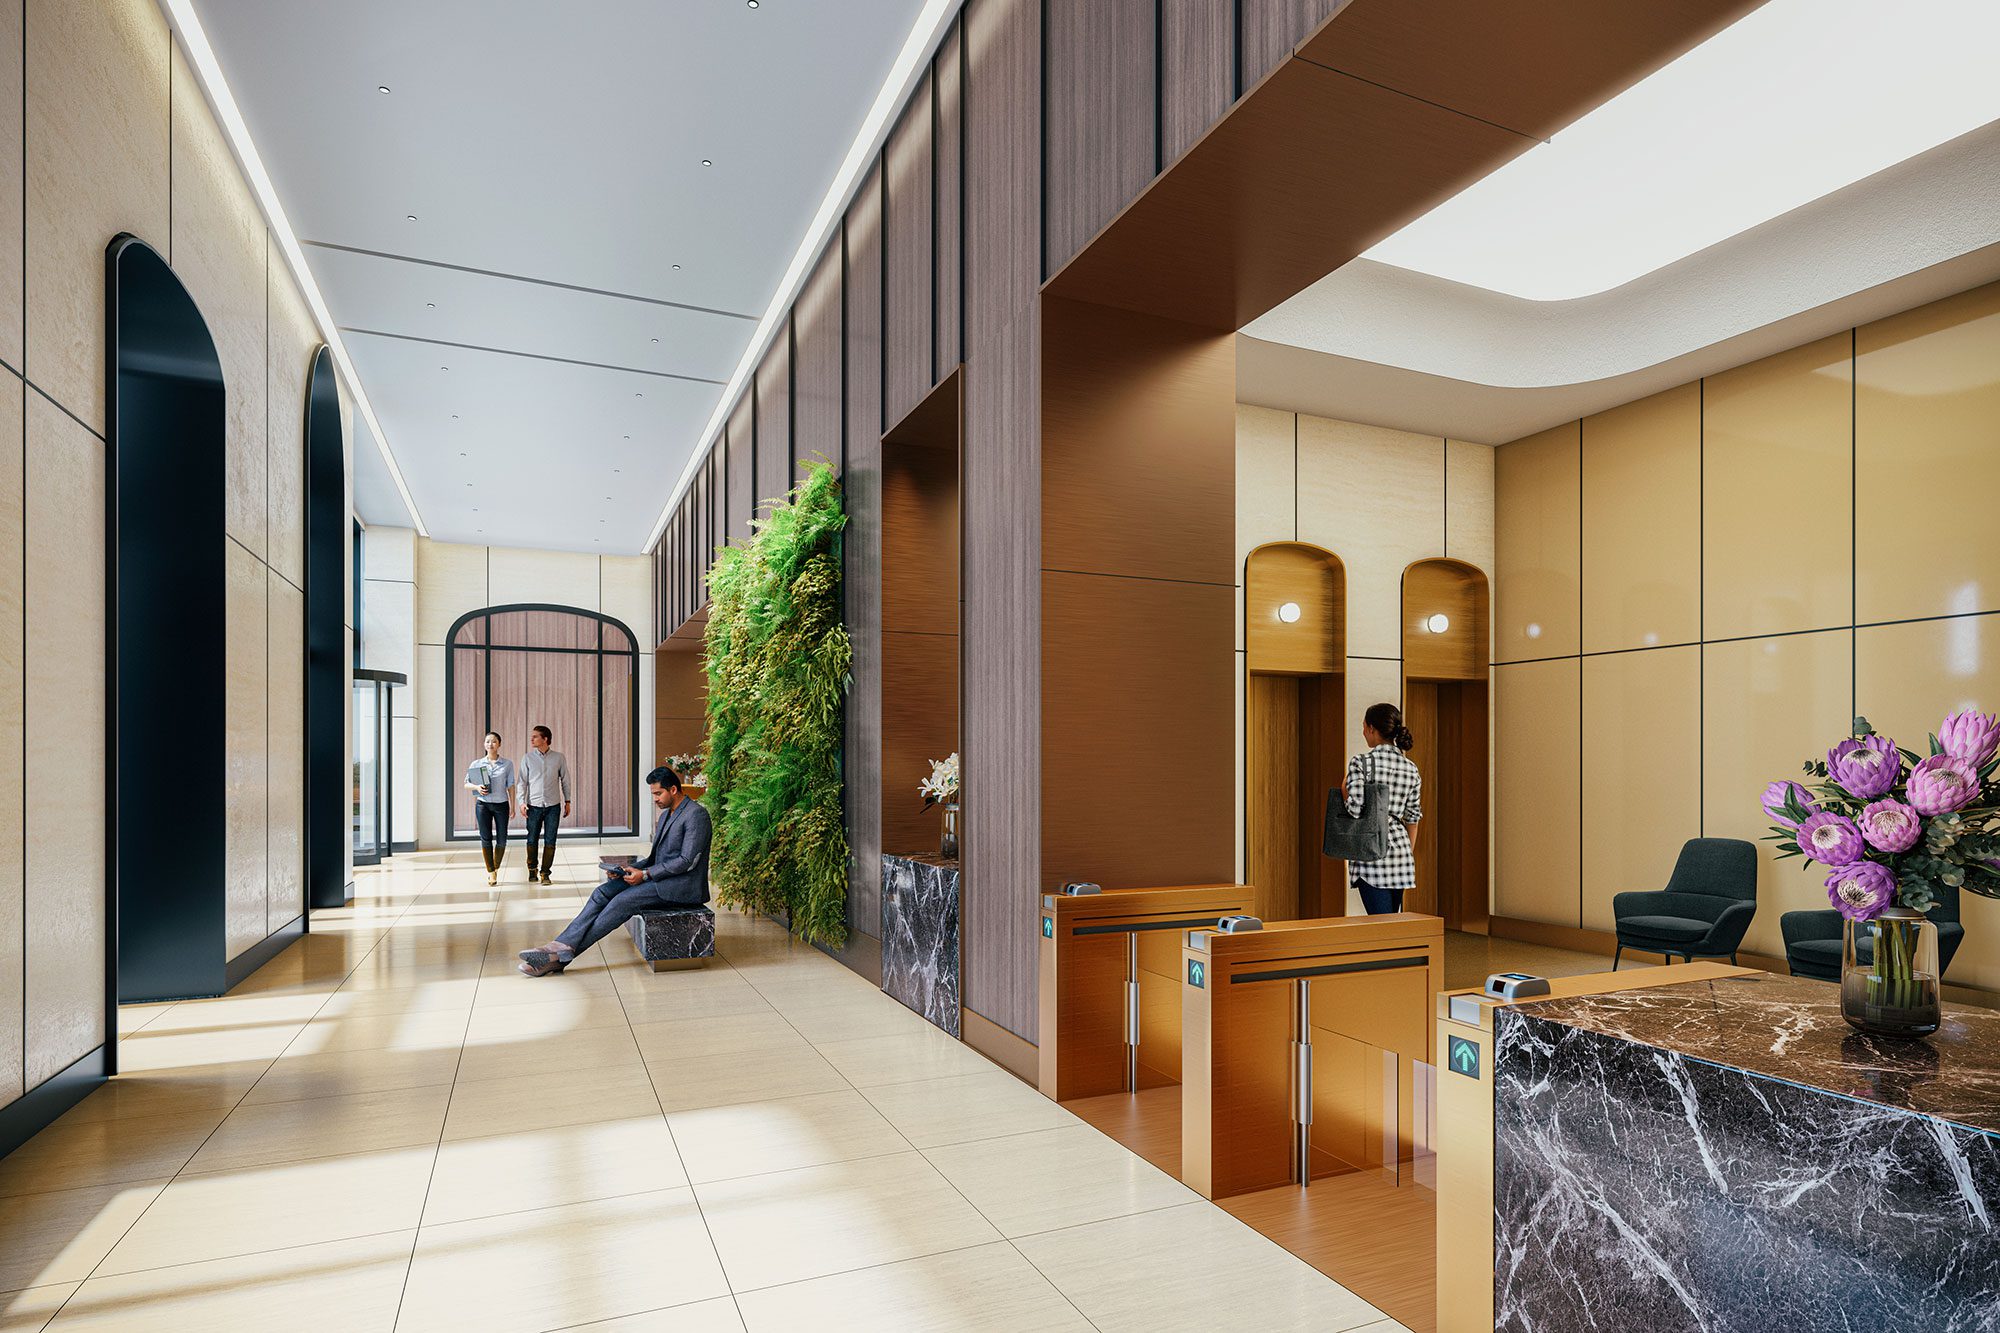 3d rendering of a stunning lobby with elevators and high ceilings